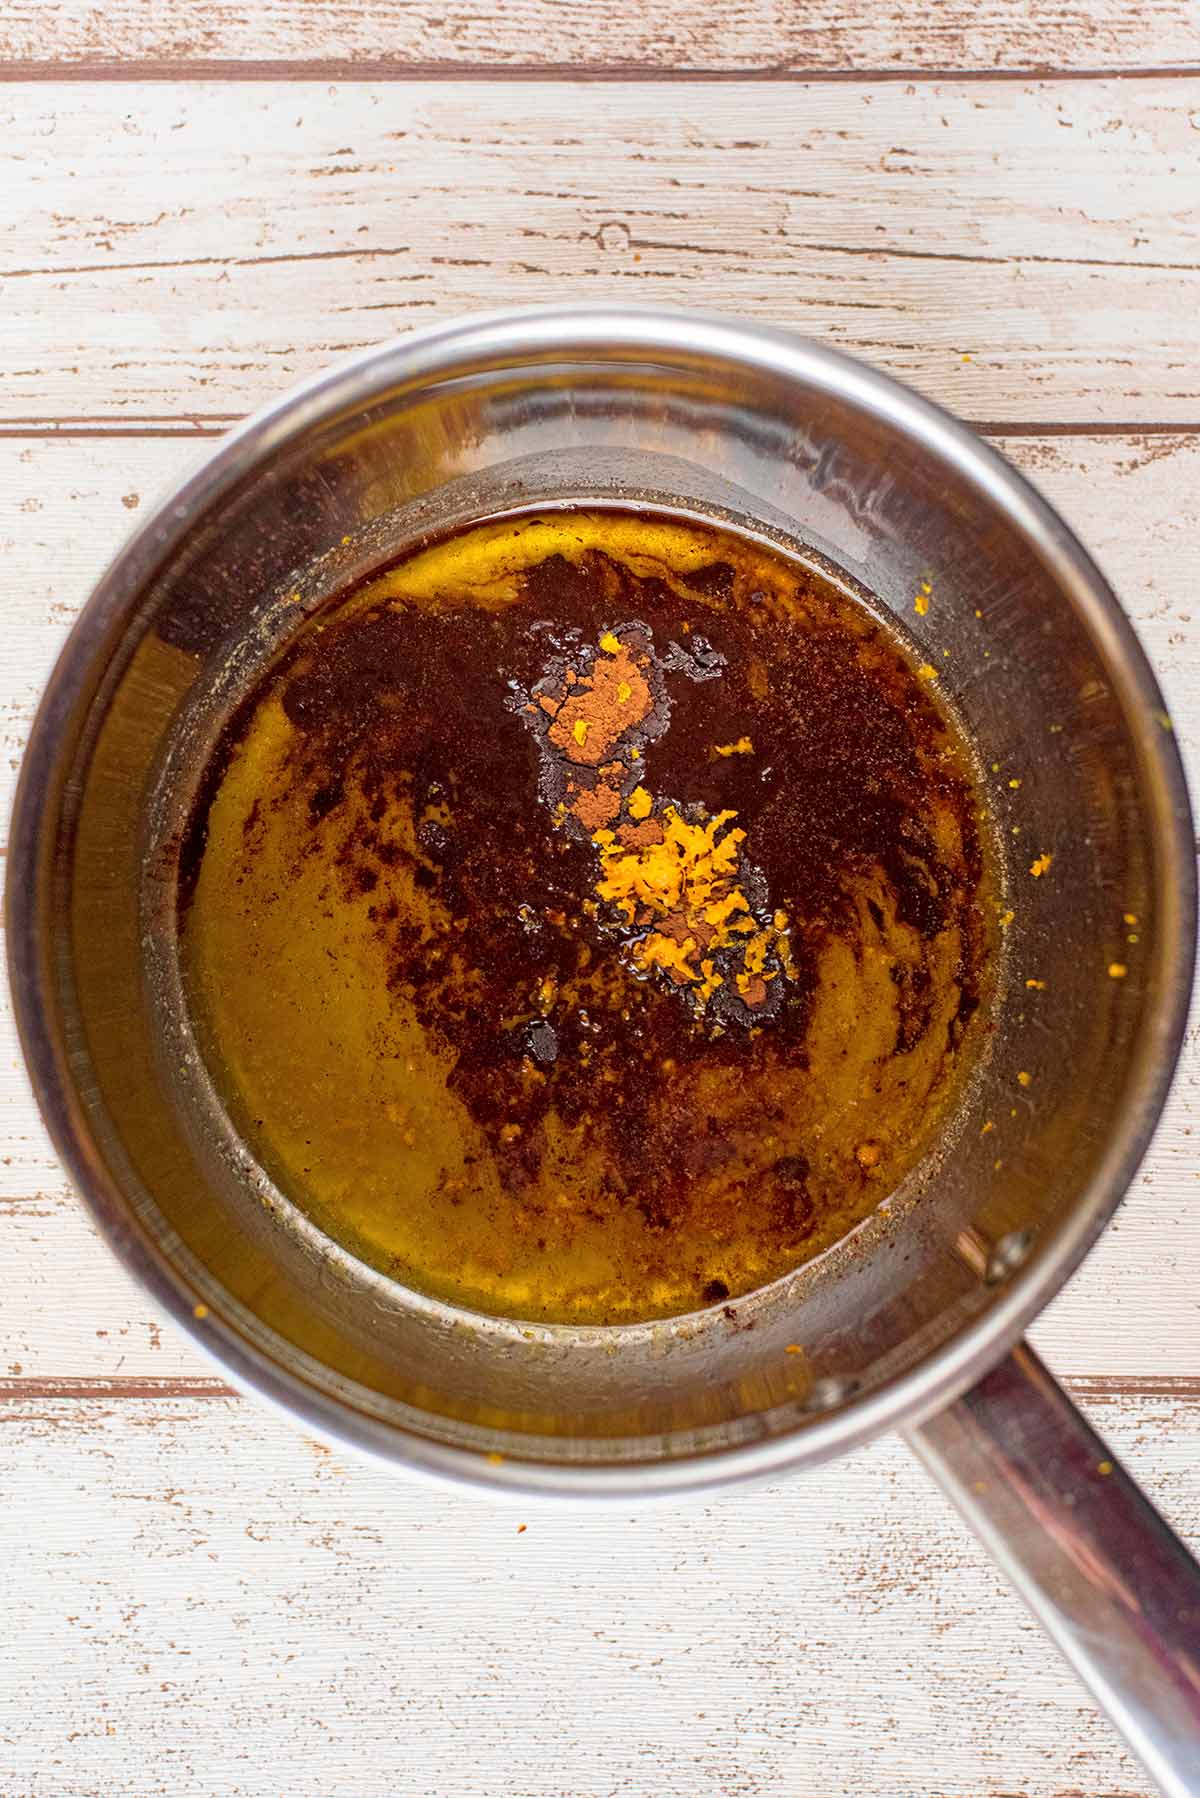 A stainless steel saucepan containing melted butter, golden syrup, spices and orange zest.